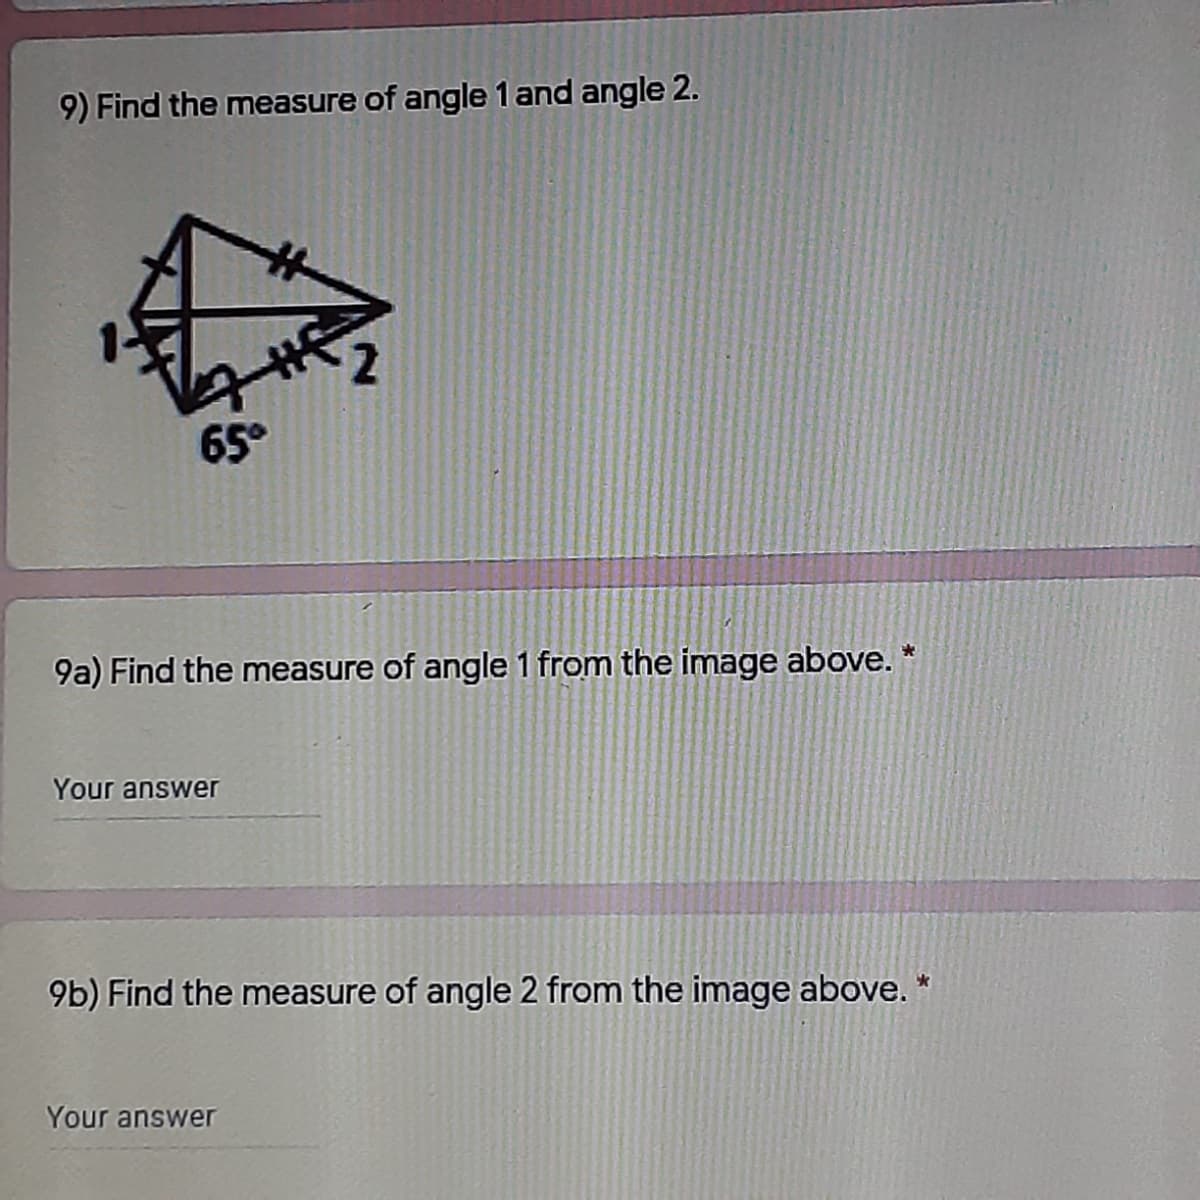 9) Find the measure of angle 1 and angle 2.
65°
9a) Find the measure of angle 1 from the image above. *
Your answer
9b) Find the measure of angle 2 from the image above. *
Your answer
